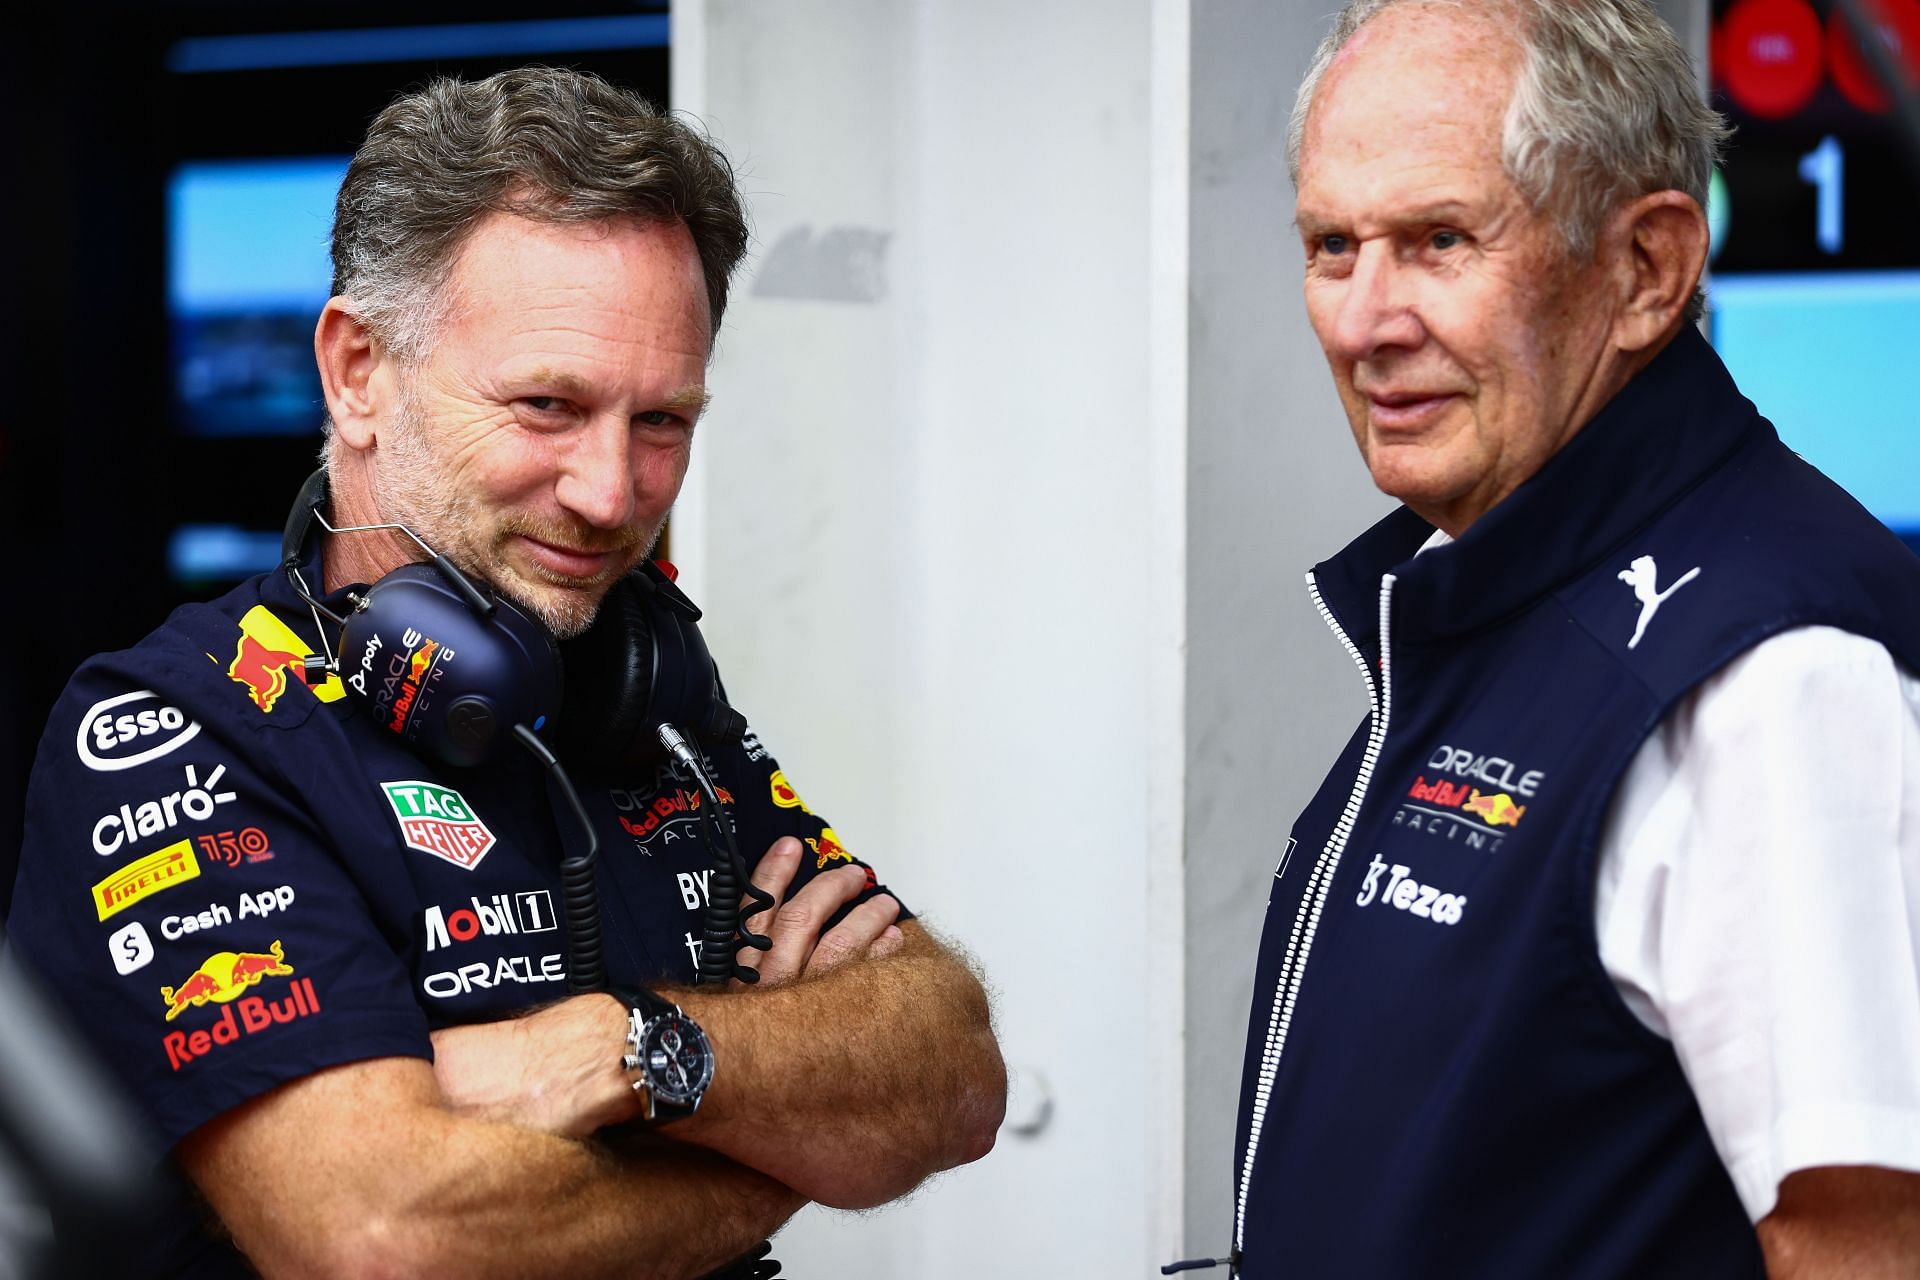 Red Bull is aiming to close down the gap to Ferrari with its new set of upgrades